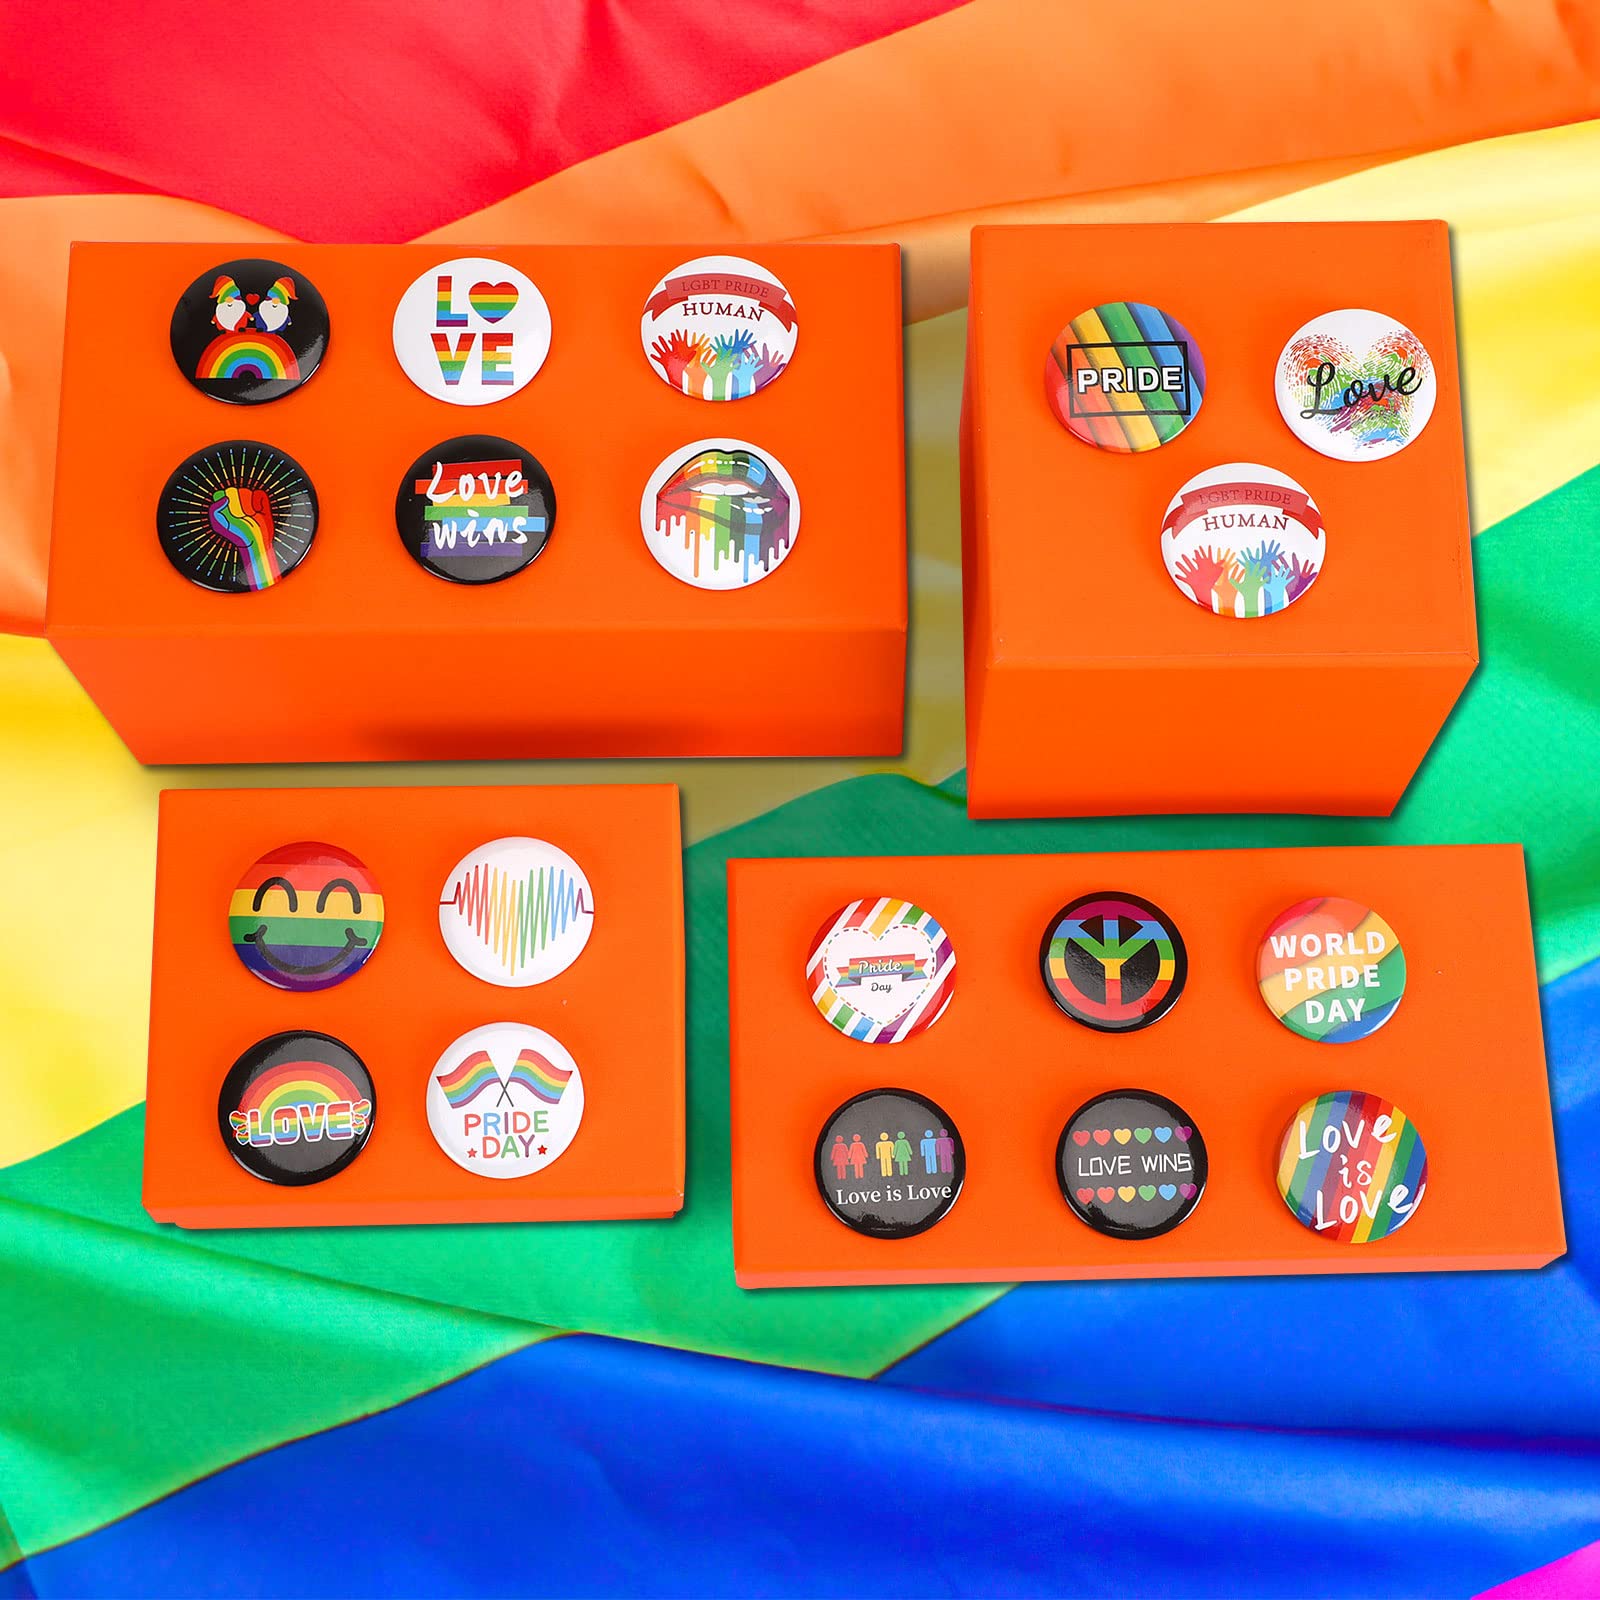 Pride Pins, SEPGLITTER 54pcs Rainbow LGBTQ Pins Bulk Pride Day Buttons Brooch Pins Badges for Pride Parades Pride Month Gay LGBT Party Favors Supplies Decorations Accessories